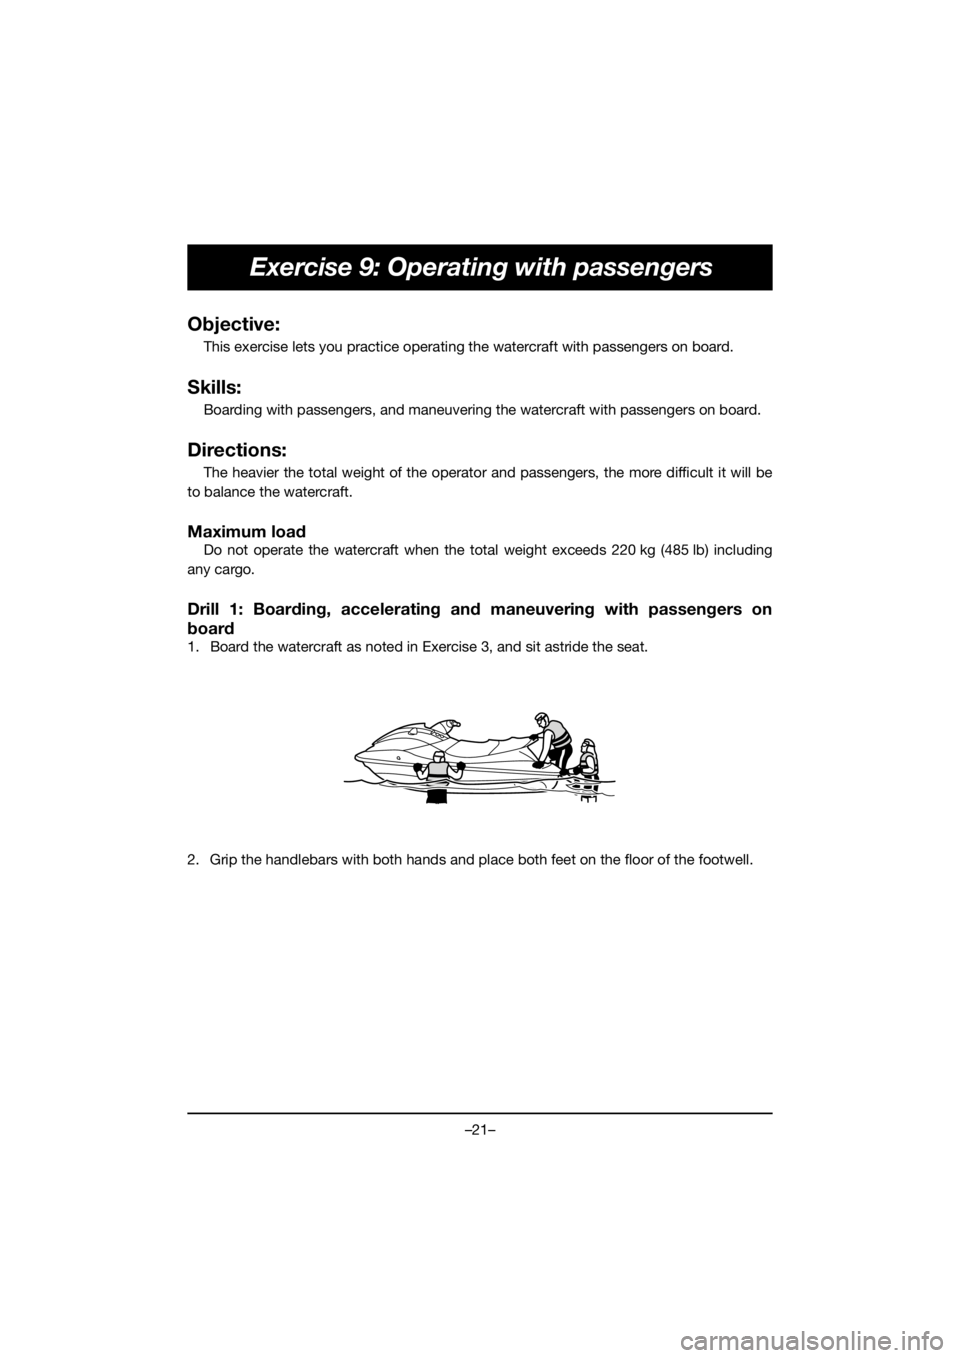 YAMAHA EX DELUXE 2019  Manuale de Empleo (in Spanish) –21–
Exercise 9: Operating with passengers
Objective:
This exercise lets you practice operating the watercraft with passengers on board.
Skills:
Boarding with passengers, and maneuvering the water